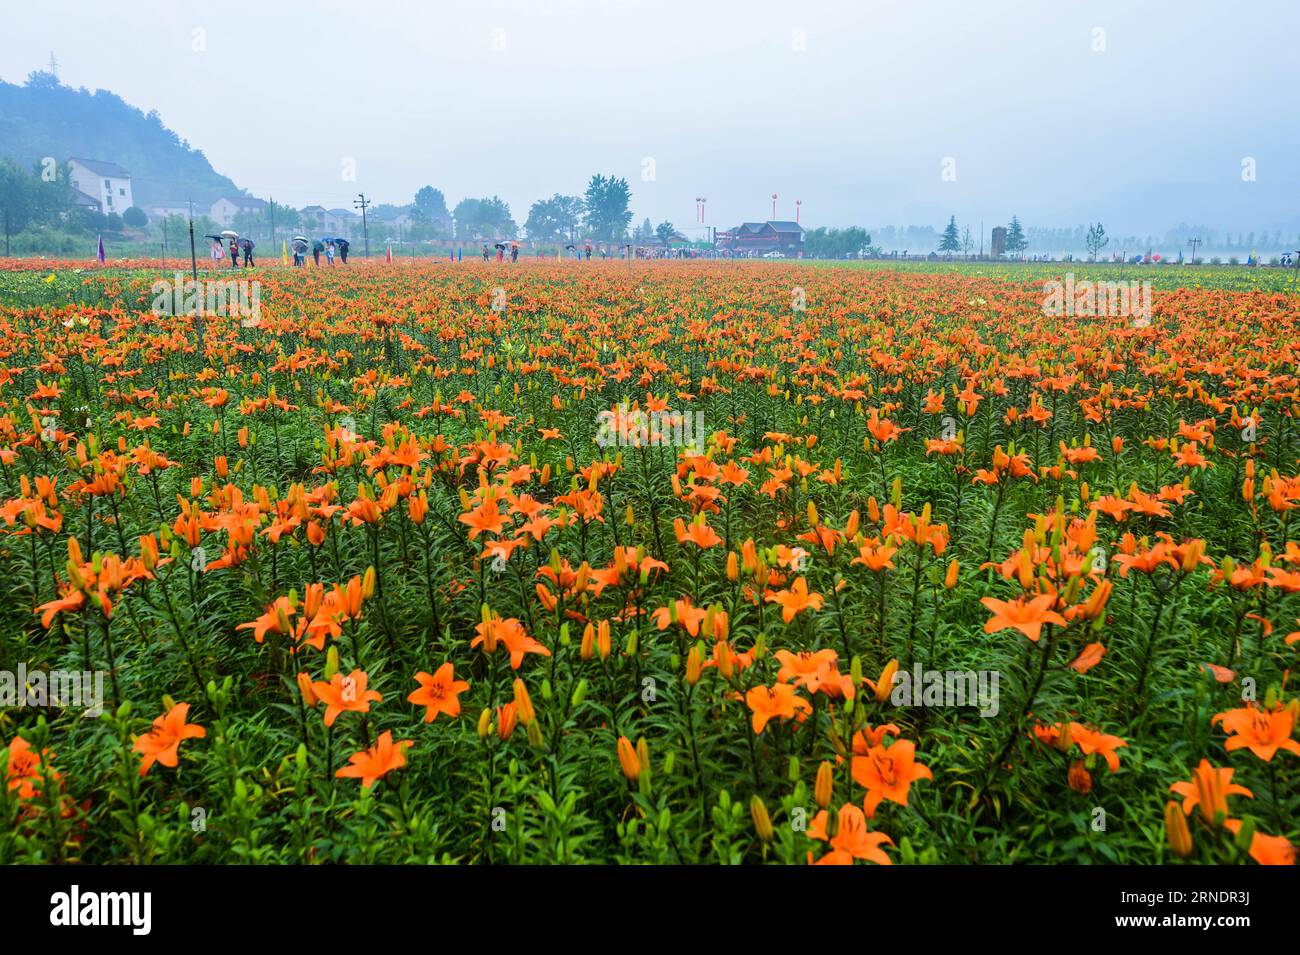 (160528) -- TONGLU, May 28, 2016 -- Tourists walk through the lily field in Fenshui Township of Tonglu County, east China s Zhejiang Province, May 28, 2016. Recenly, lilies in Tonglu county are in full blossom, which attracted many tourists. ) (zhs) CHINA-ZHEJIANG-TONGLU-LILIES (CN) XuxYu PUBLICATIONxNOTxINxCHN   160528 Tonglu May 28 2016 tourists Walk Through The Lily Field in Fenshui Township of Tonglu County East China S Zhejiang Province May 28 2016 recenly lilies in Tonglu County are in Full Blossom Which attracted MANY tourists zhs China Zhejiang Tonglu lilies CN XuxYu PUBLICATIONxNOTxIN Stock Photo